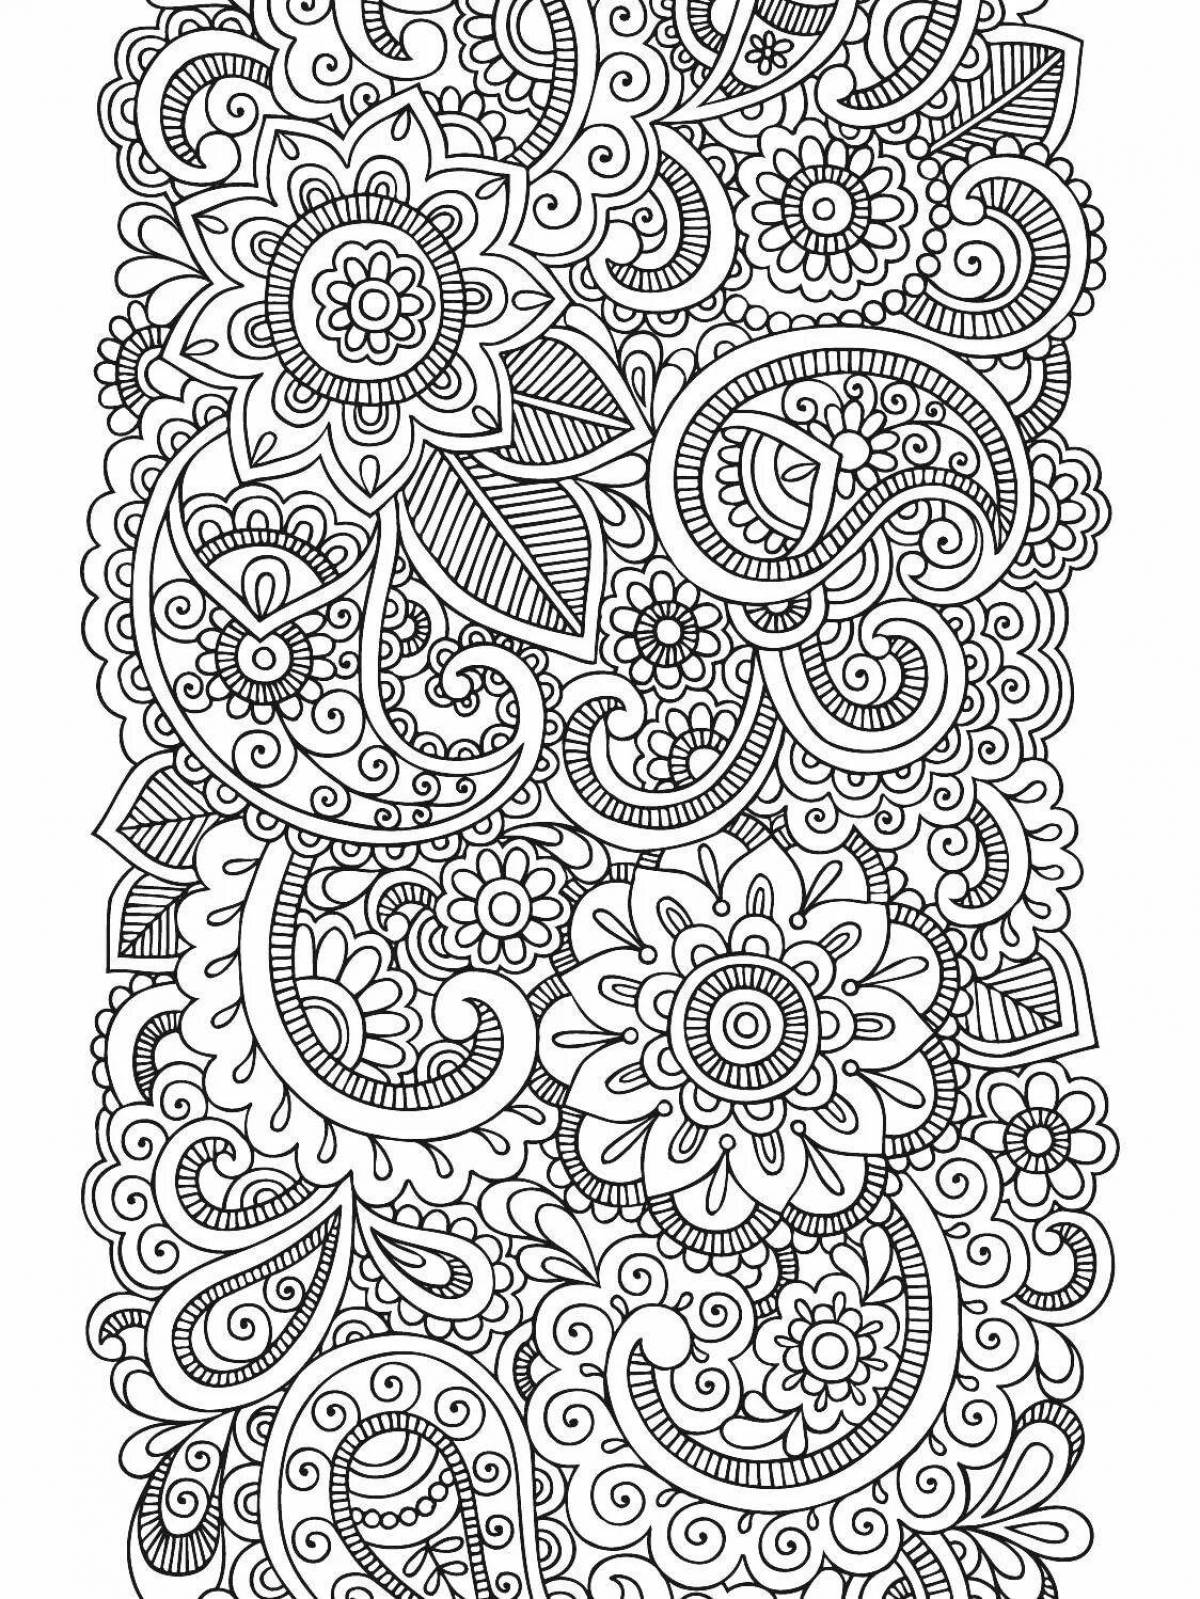 Amazing coloring book for adults ru beautiful